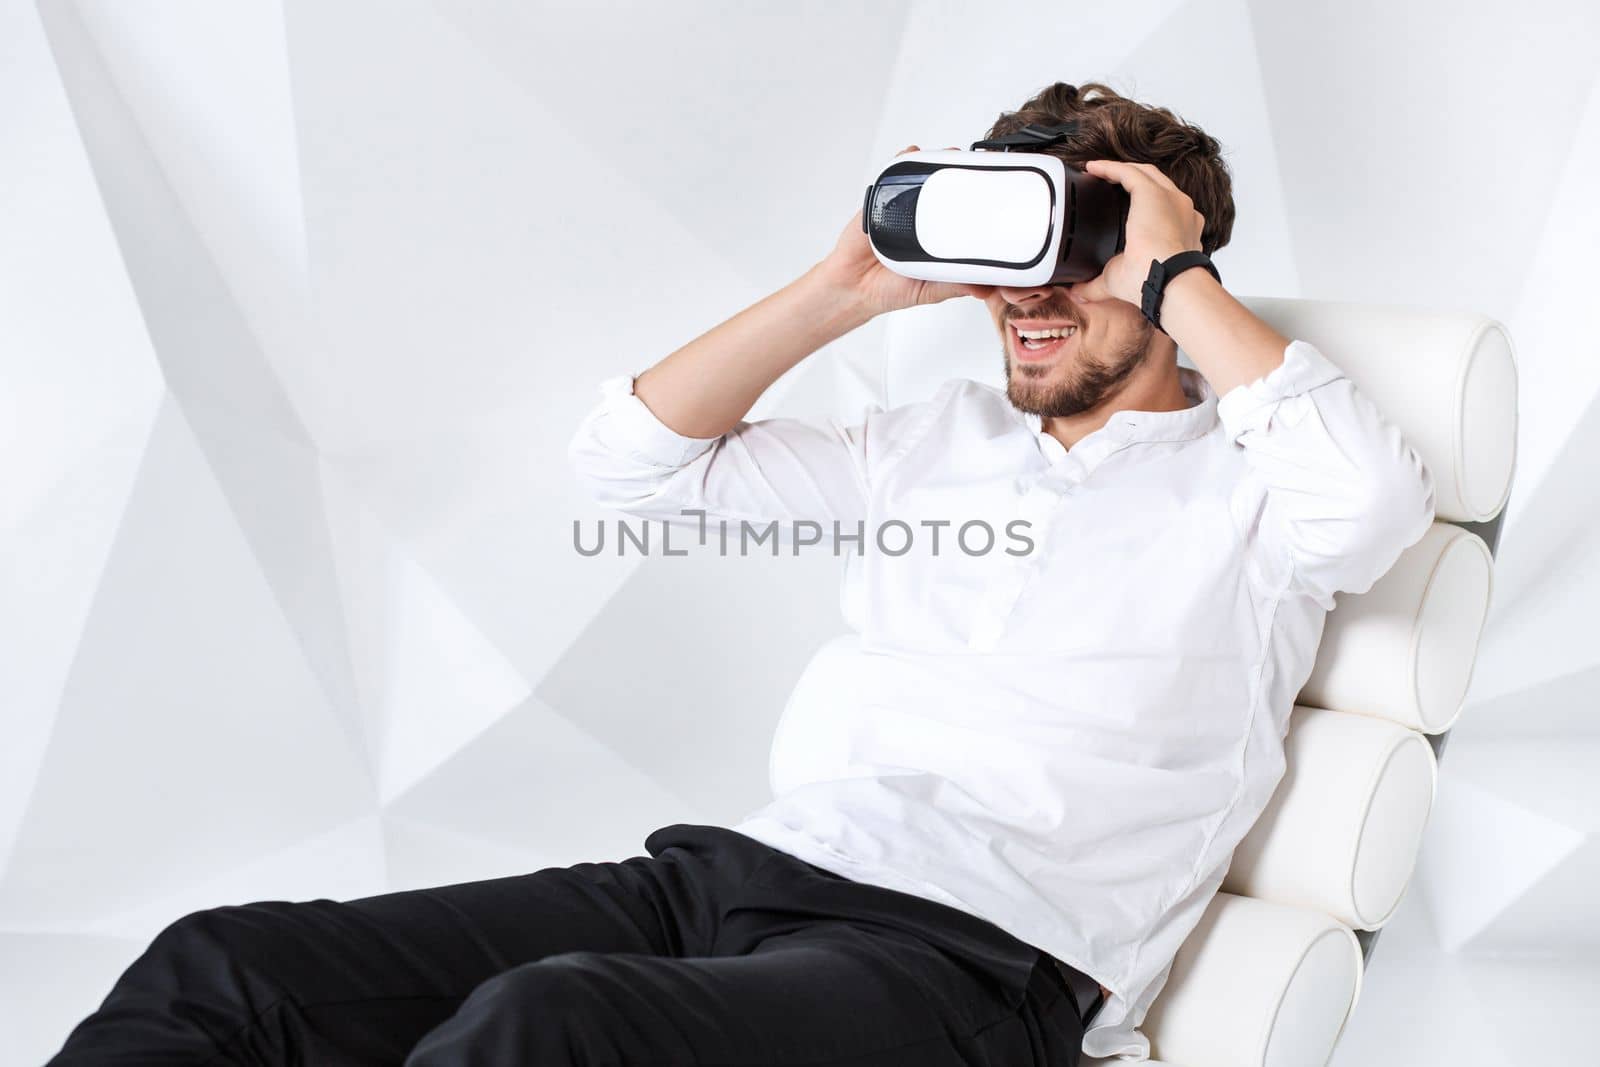 Excited young man is getting experience using VR-headset glasses of virtual reality gesticulating with his hands. A young man sits on a comfortable armchair in a room with white walls